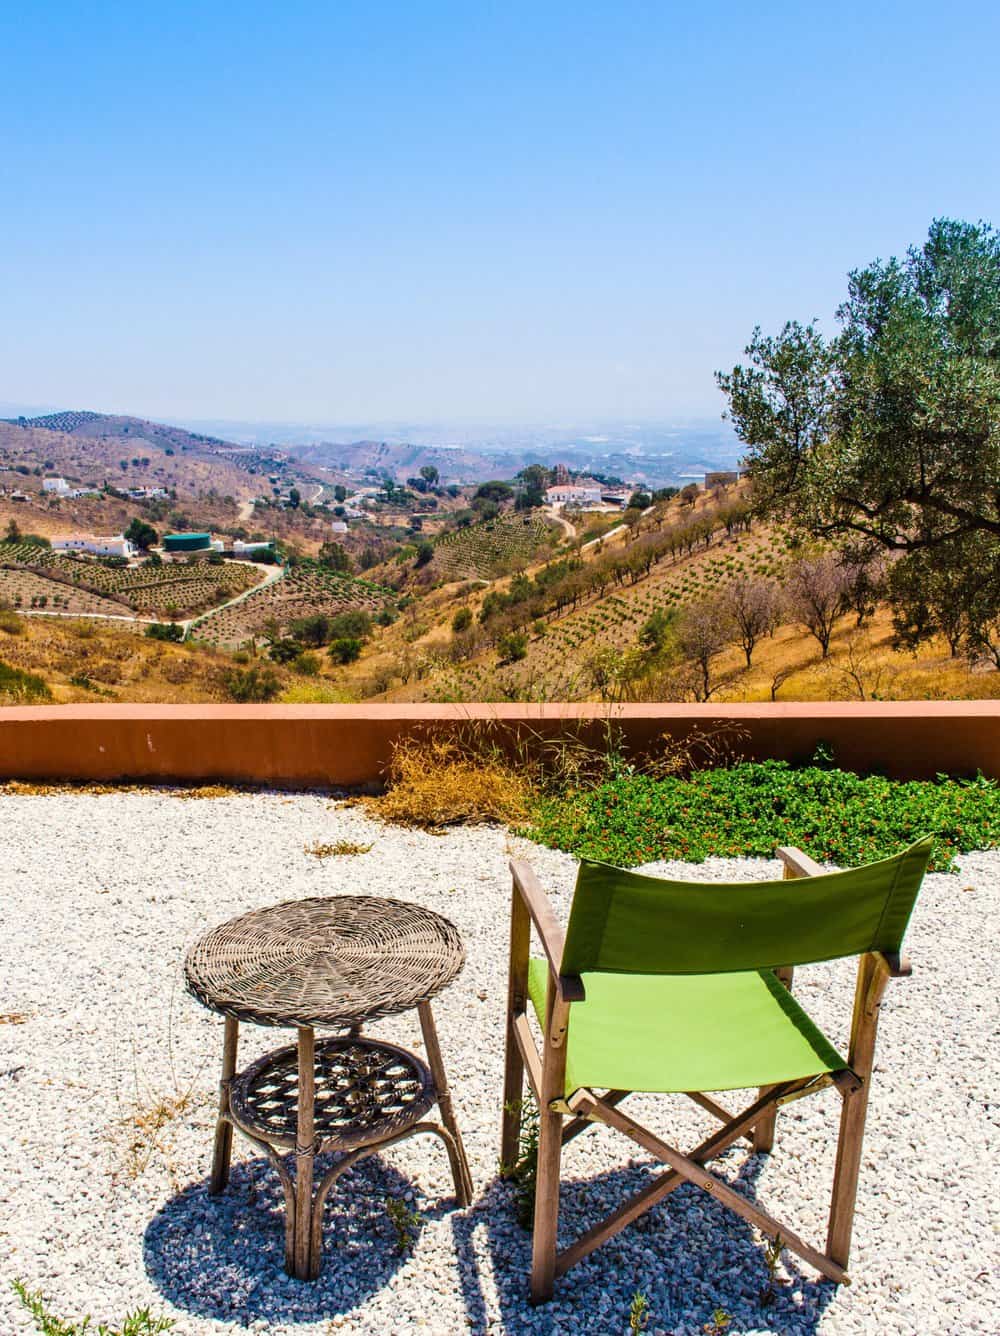 Slow living lifestyle in spain. A chair gazes out over a vast and beauitful view. A perfect spot to do nothing in.